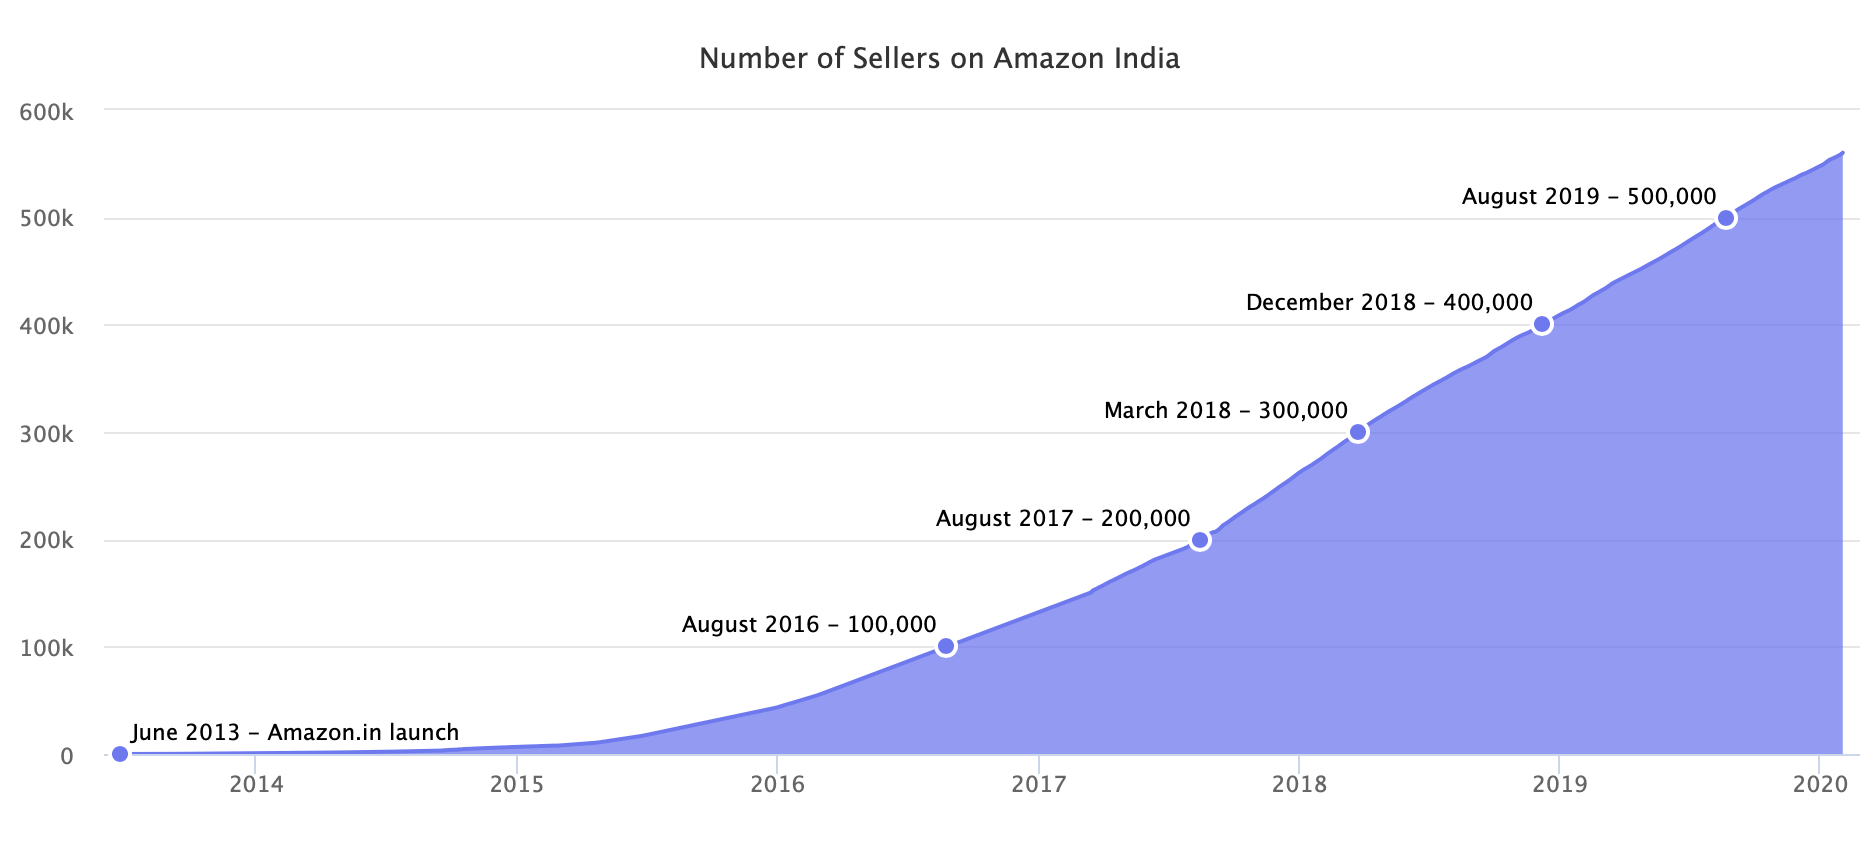 Number of Sellers on Amazon India